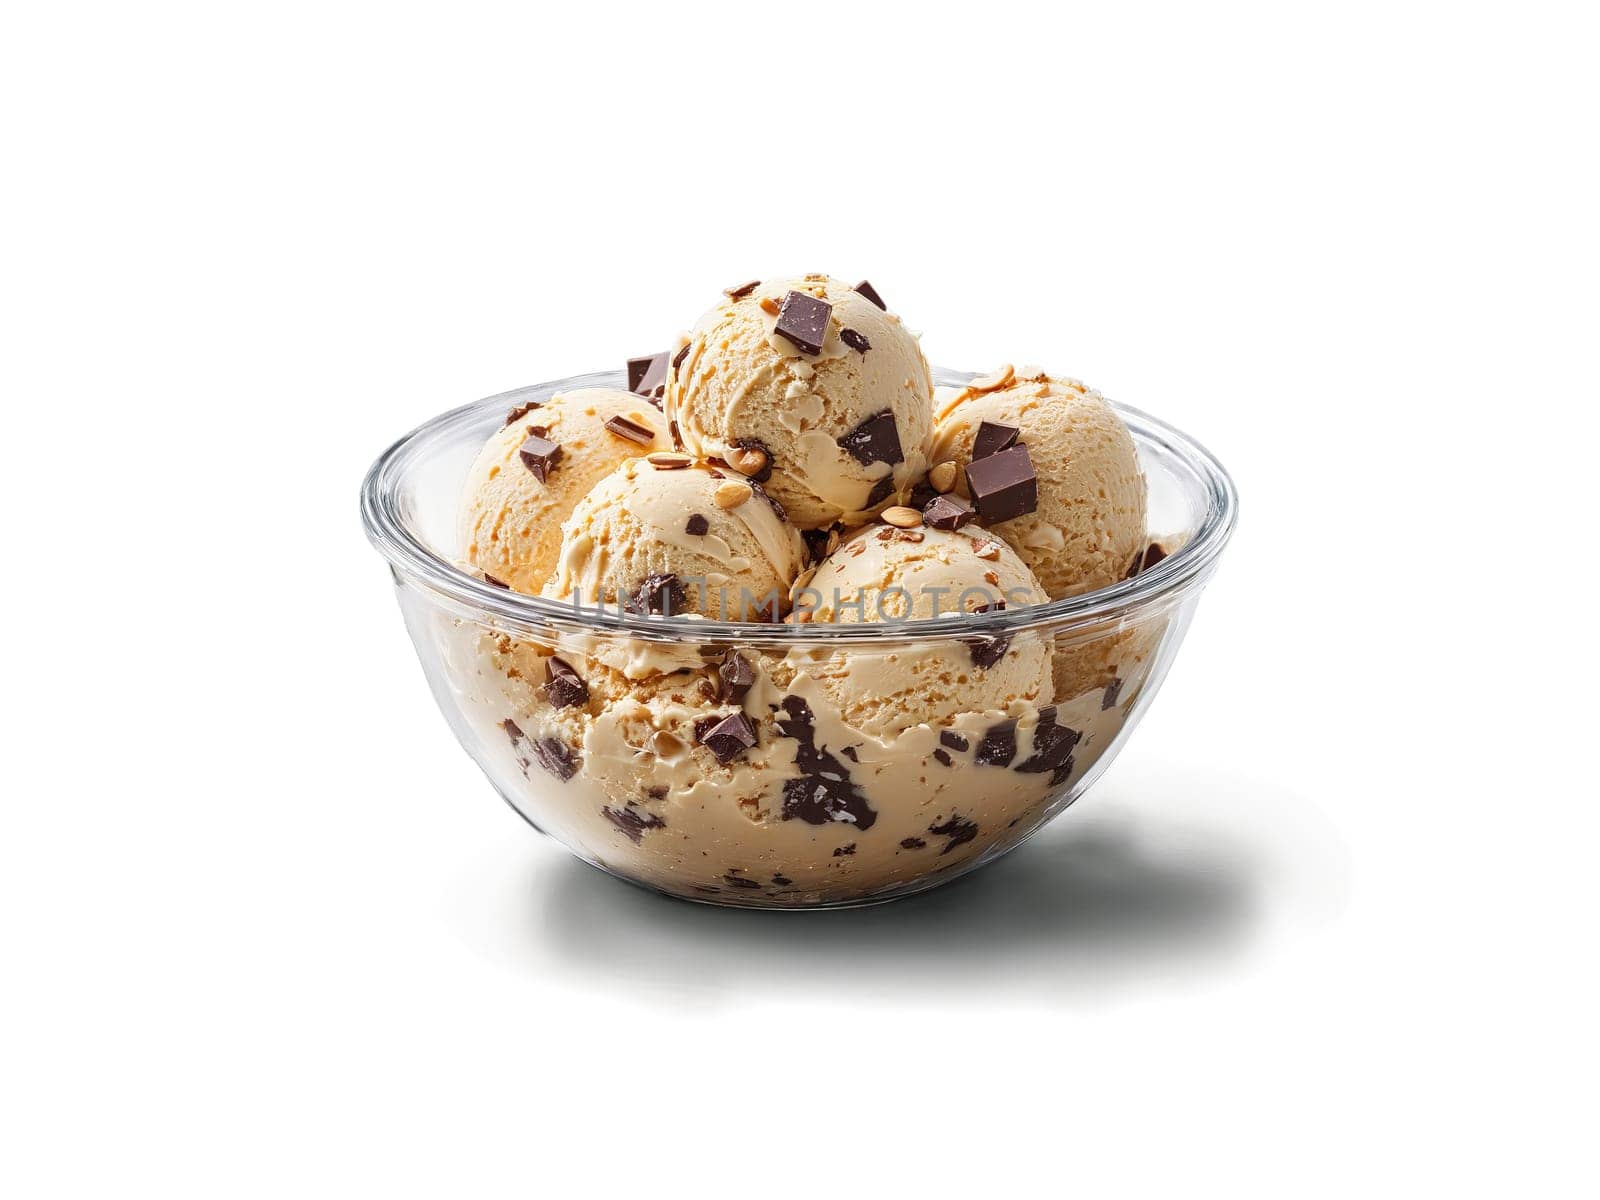 Ice cream toasted almond fudge scoops with chocolate chunks in a transparent glass bowl crunchy. Food isolated on transparent background.